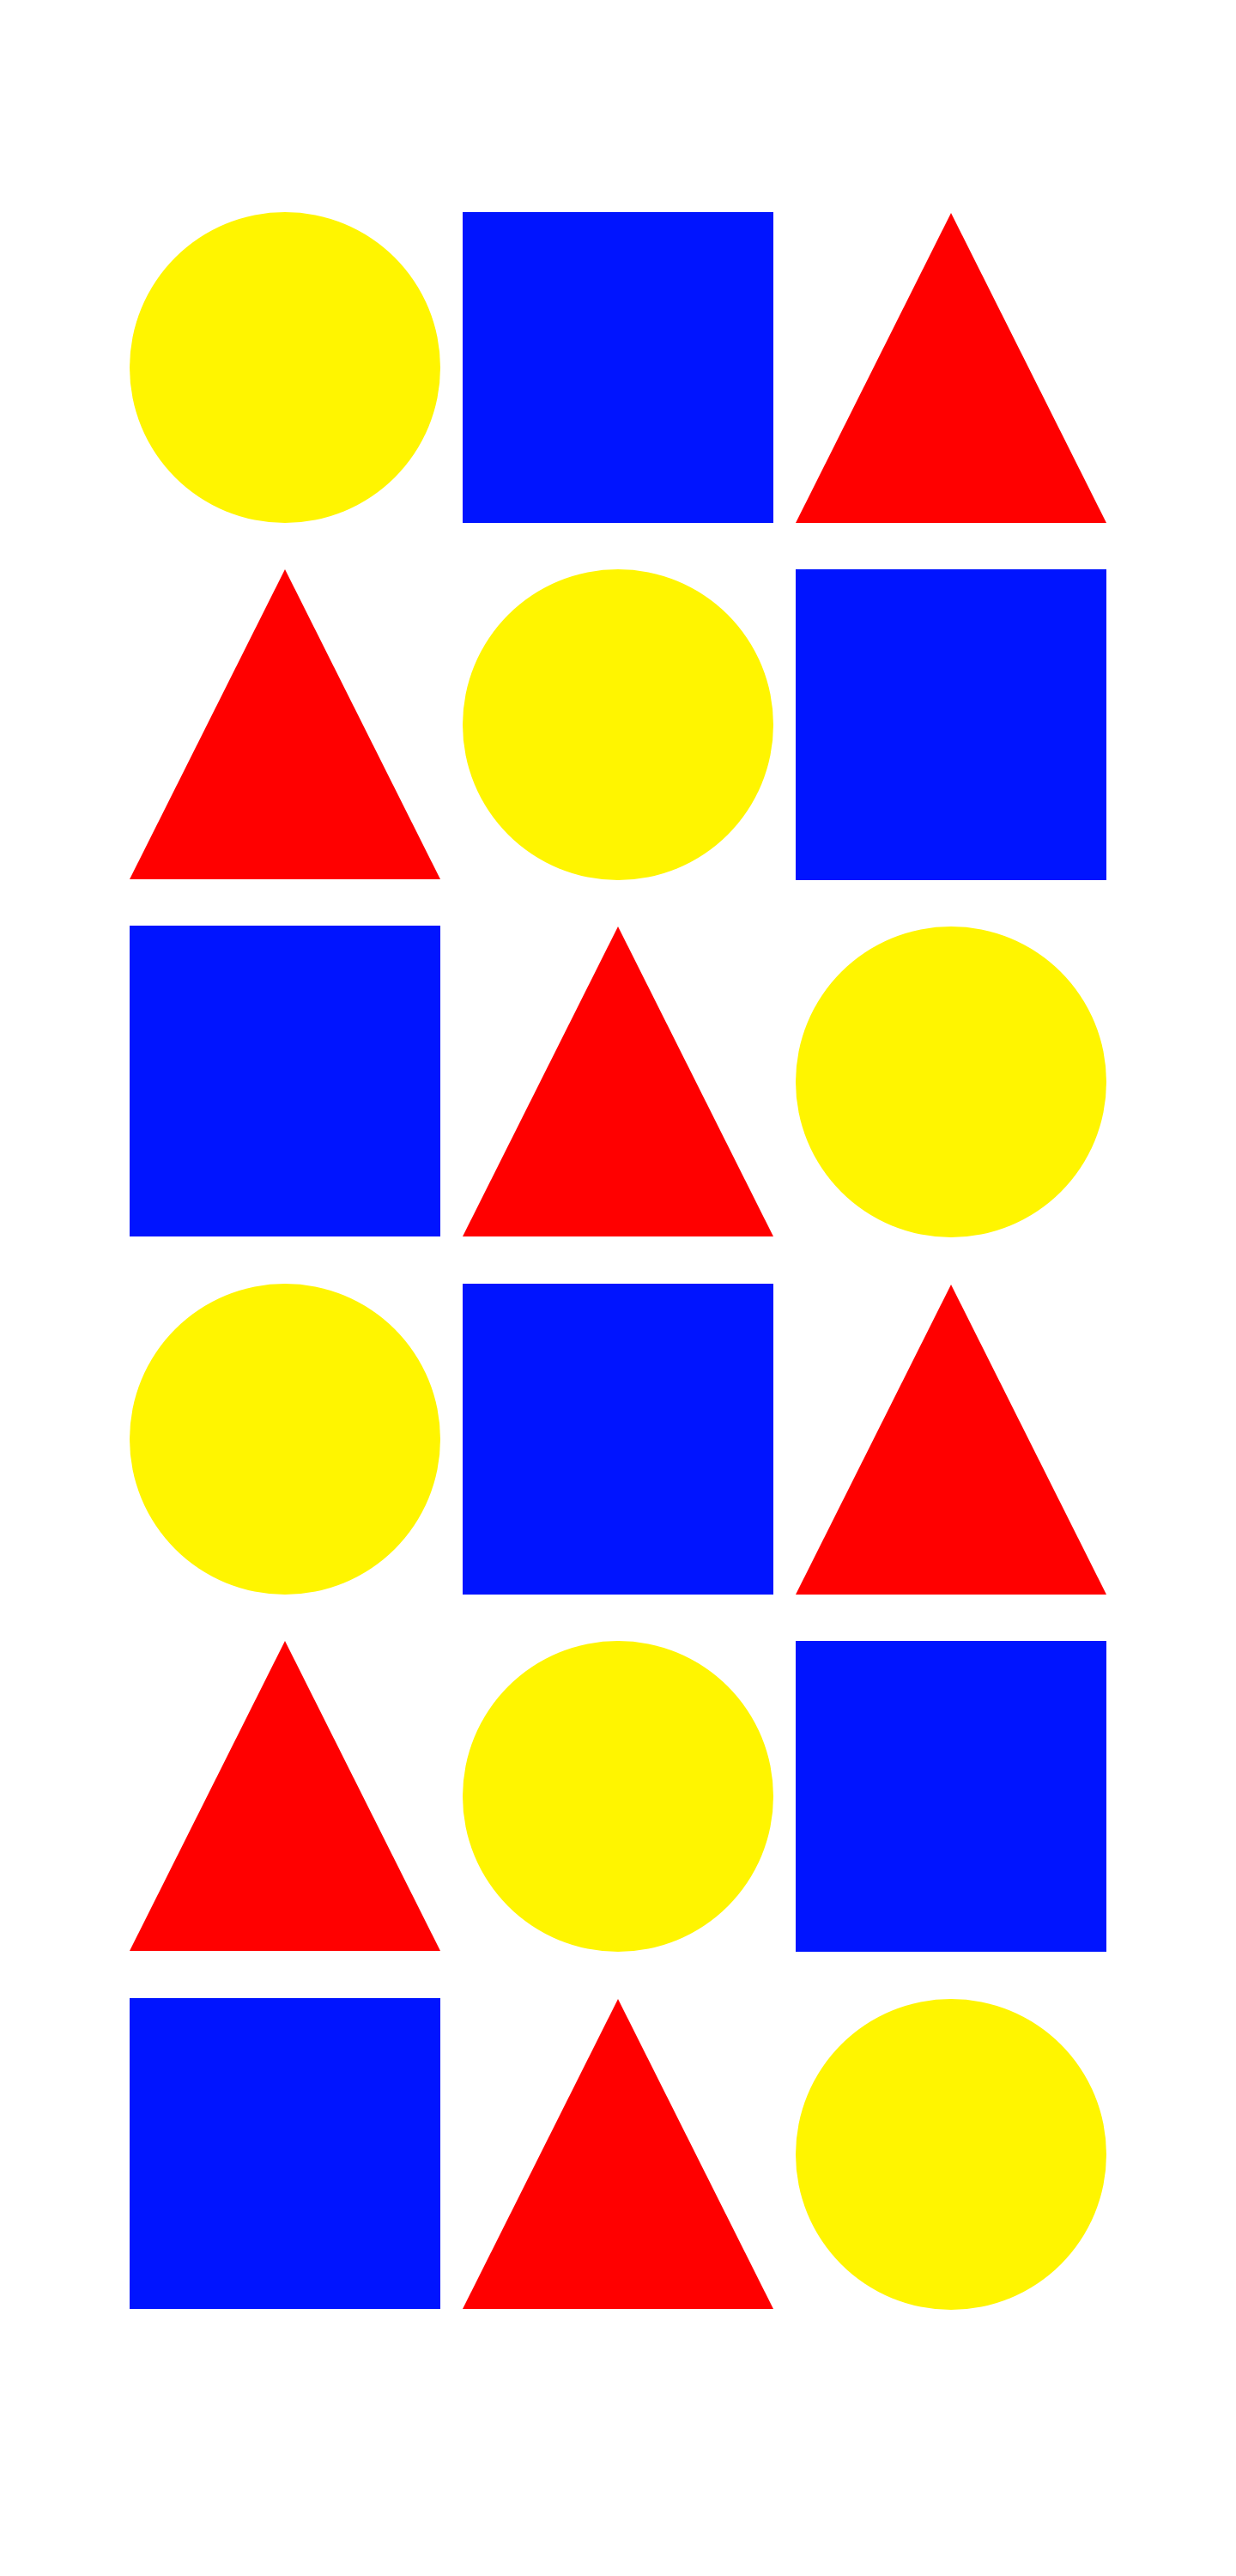 yellow circles, blue squares, and red triangles on a grid